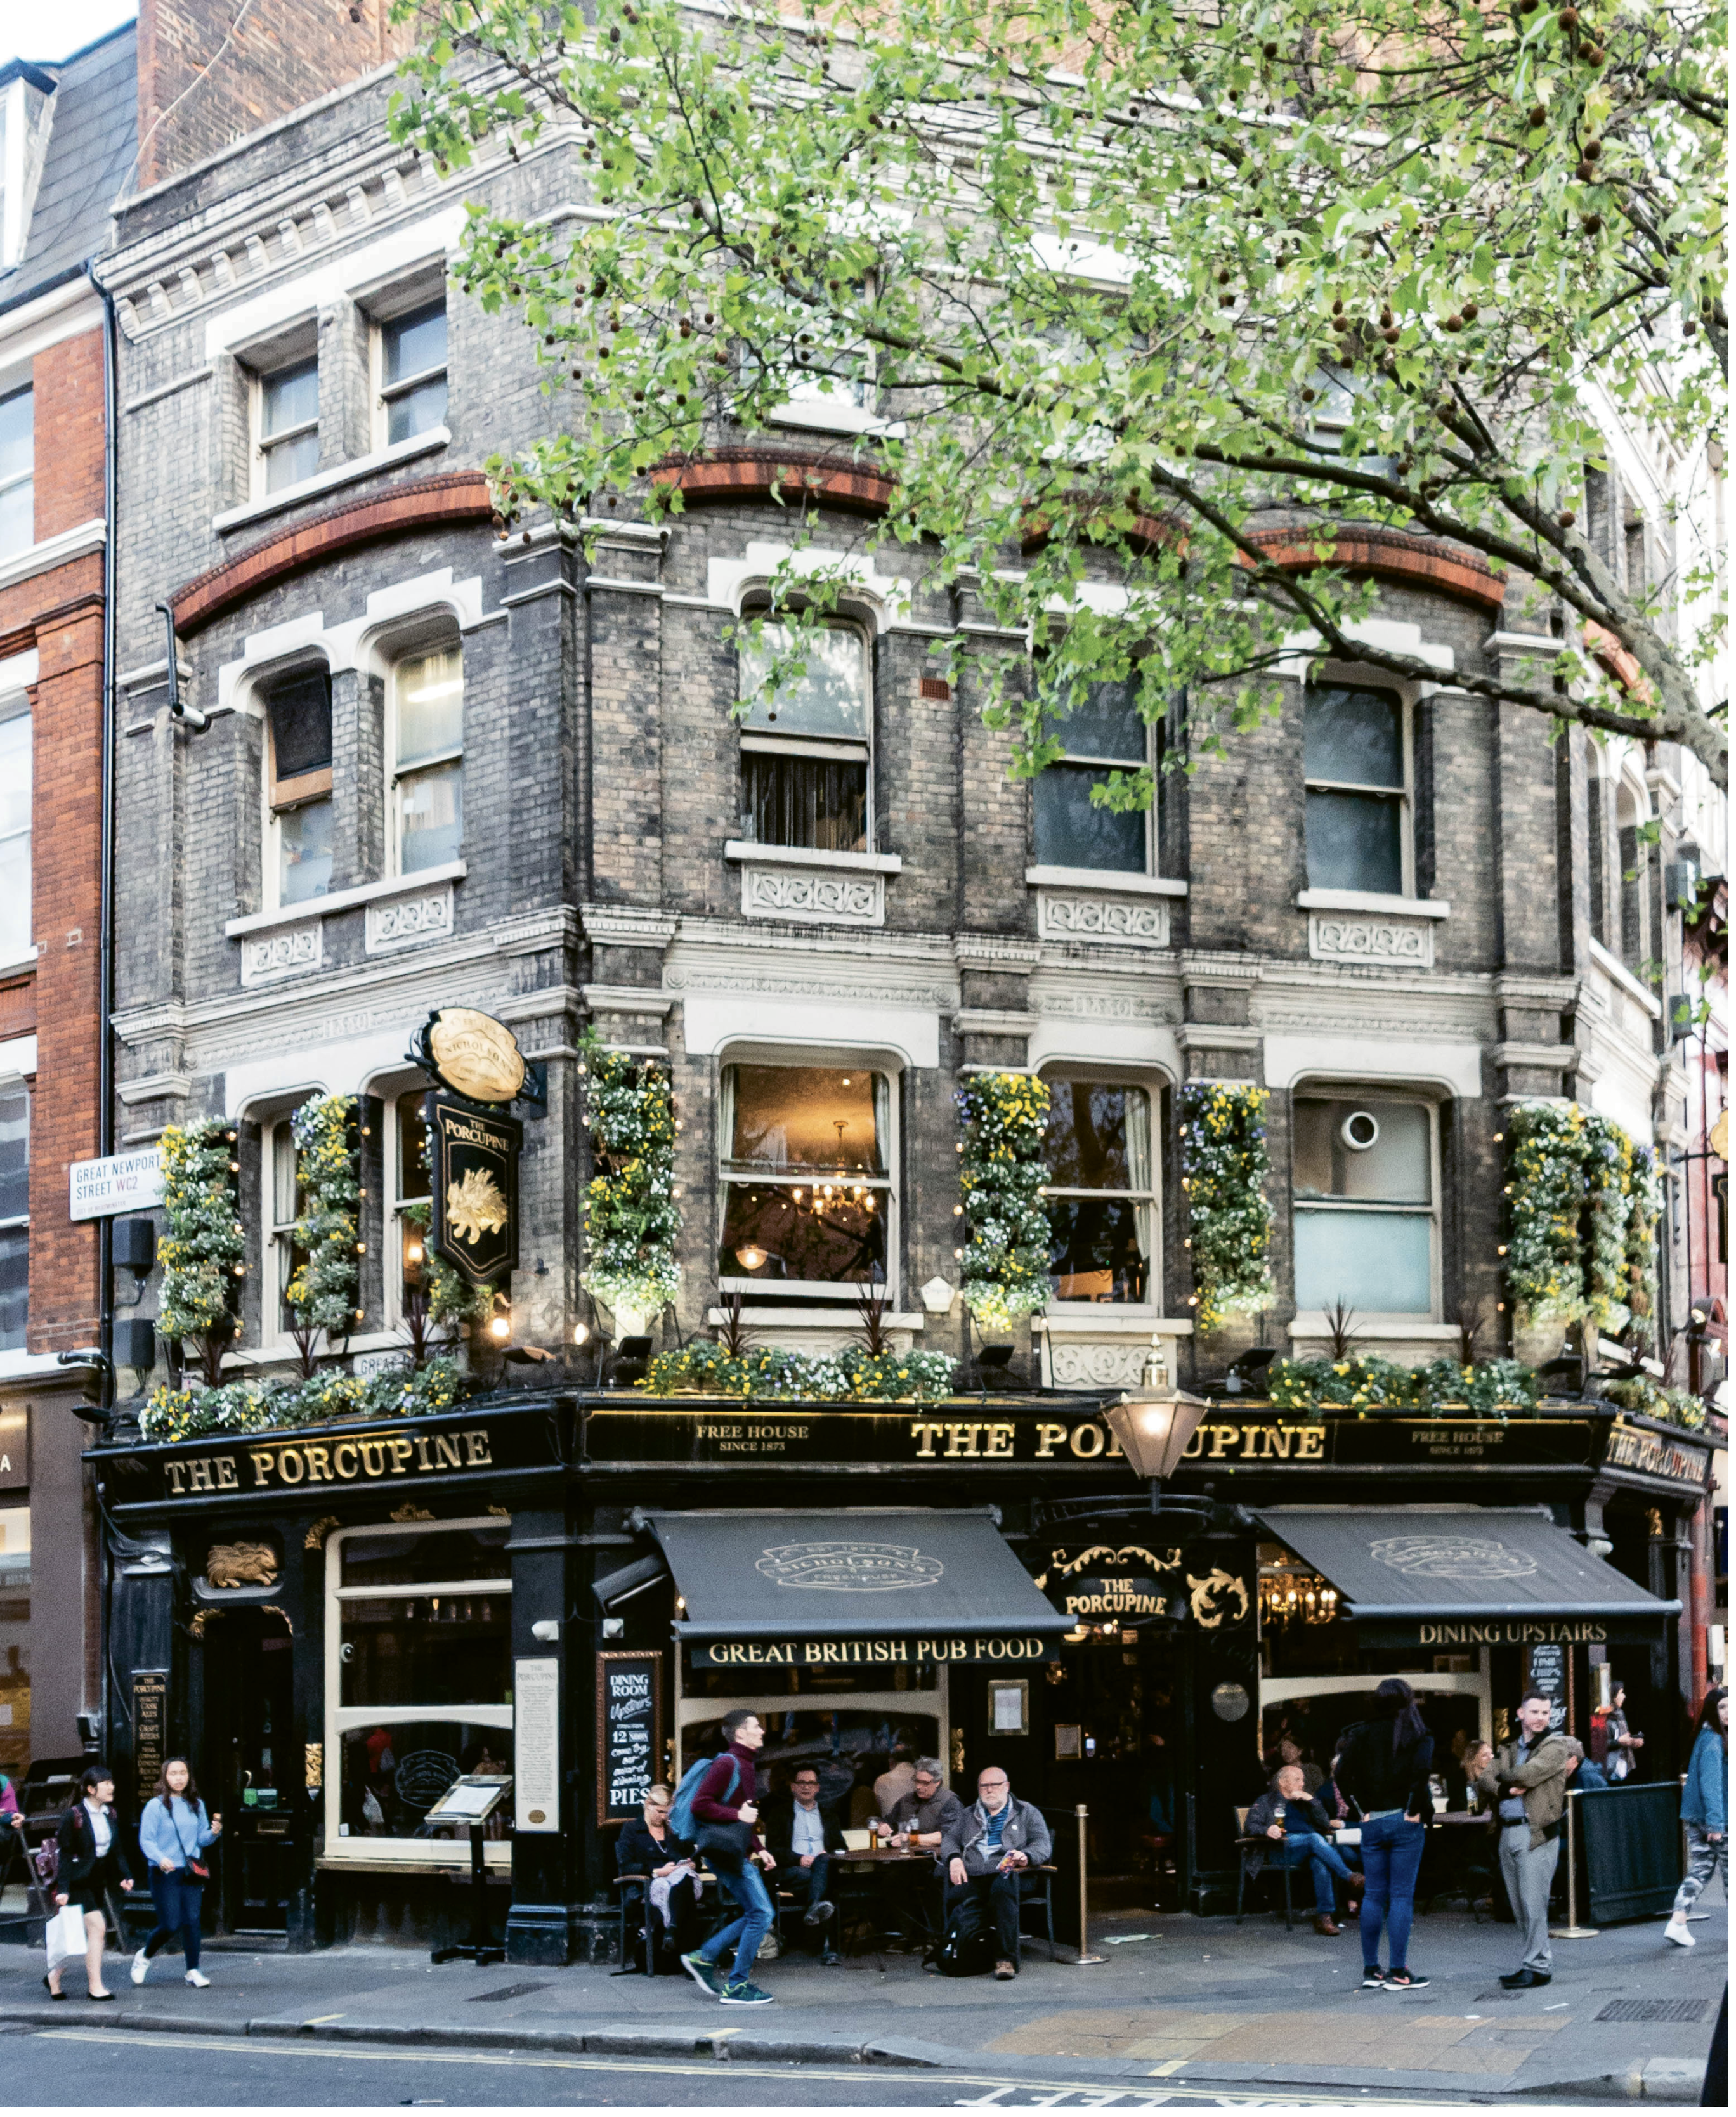 The Porcupine public house in Leicester Square dates to 1725.